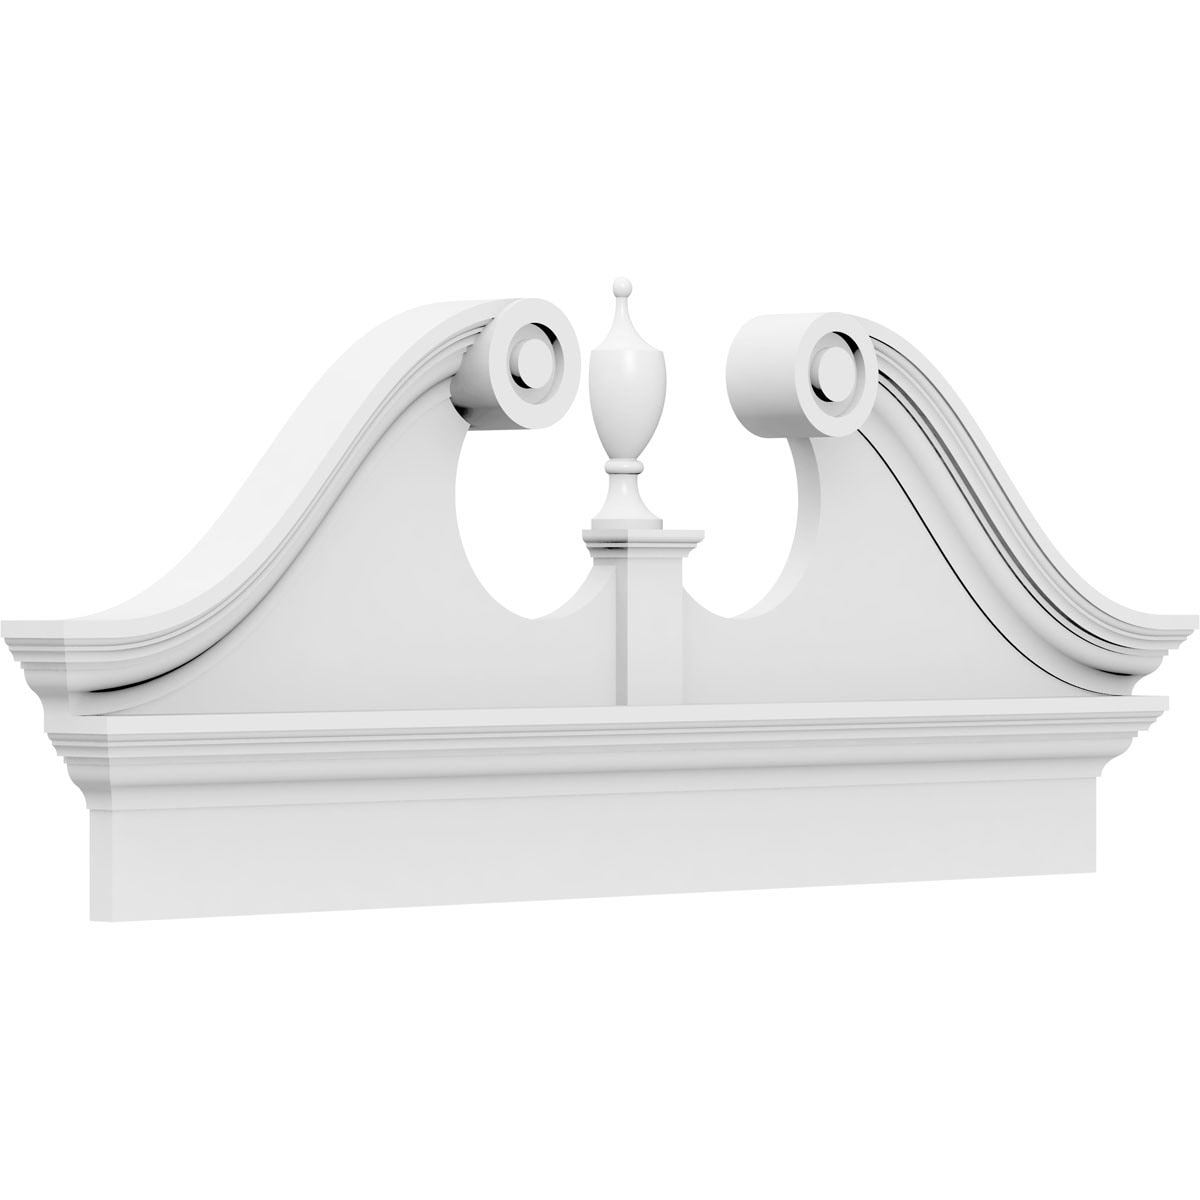 Ekena Millwork Rams Head 48-in x 18-7/8-in Unfinished PVC Pediment Entry Door Casing Accent in White | PEDPC048X190RHP00